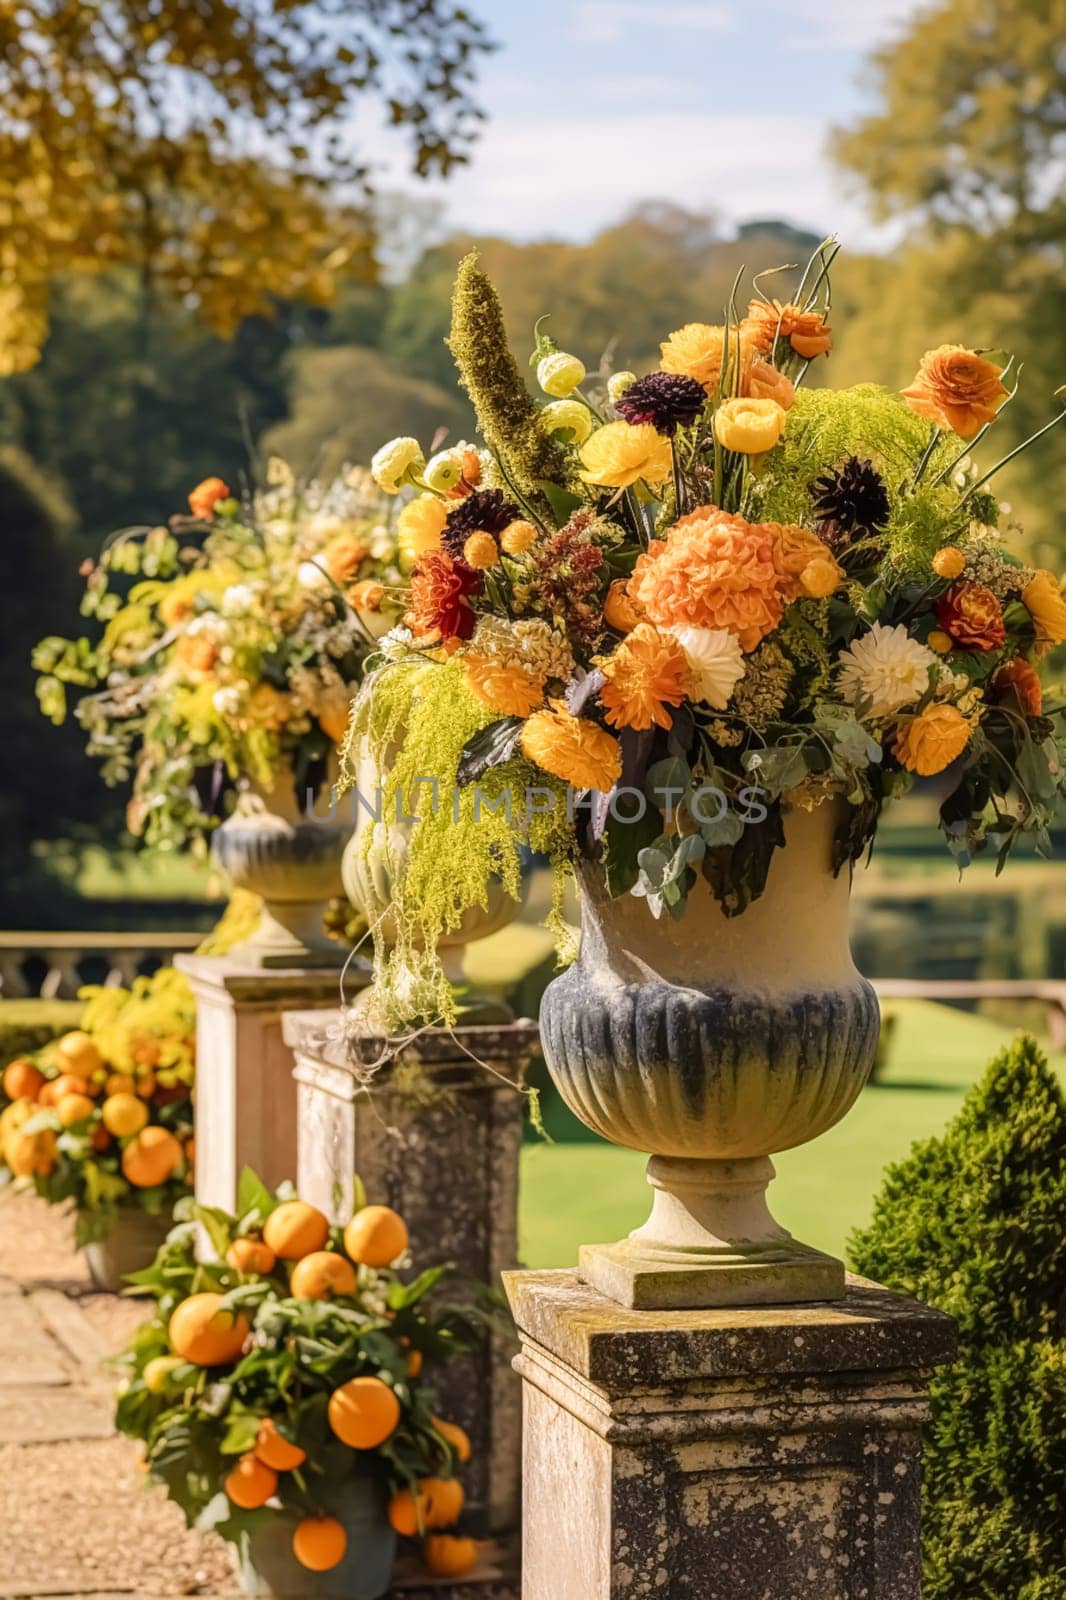 Floral decoration, wedding decor and autumn holiday celebration, autumnal flowers and event decorations in the English countryside garden, country style by Anneleven